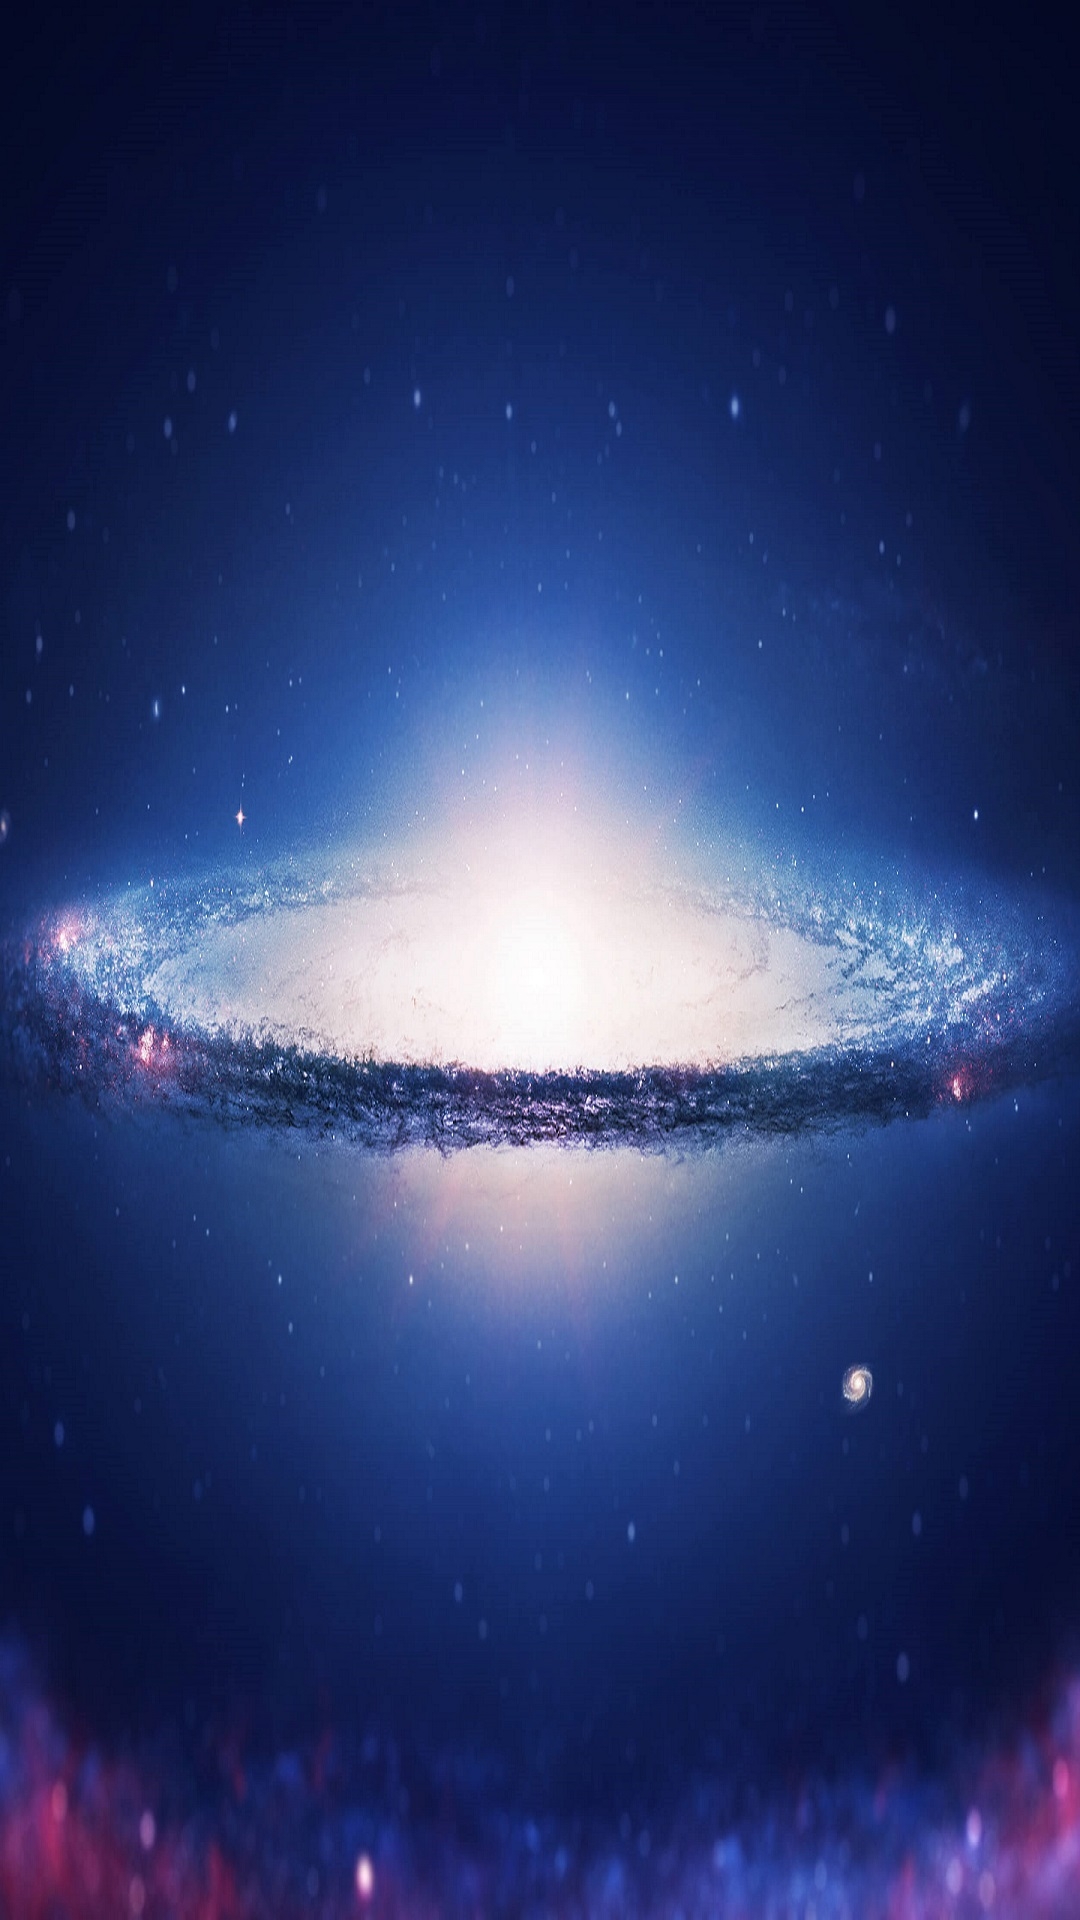 Sombrero Galaxy for Apple iPhone 6S & 7 Plus resolution